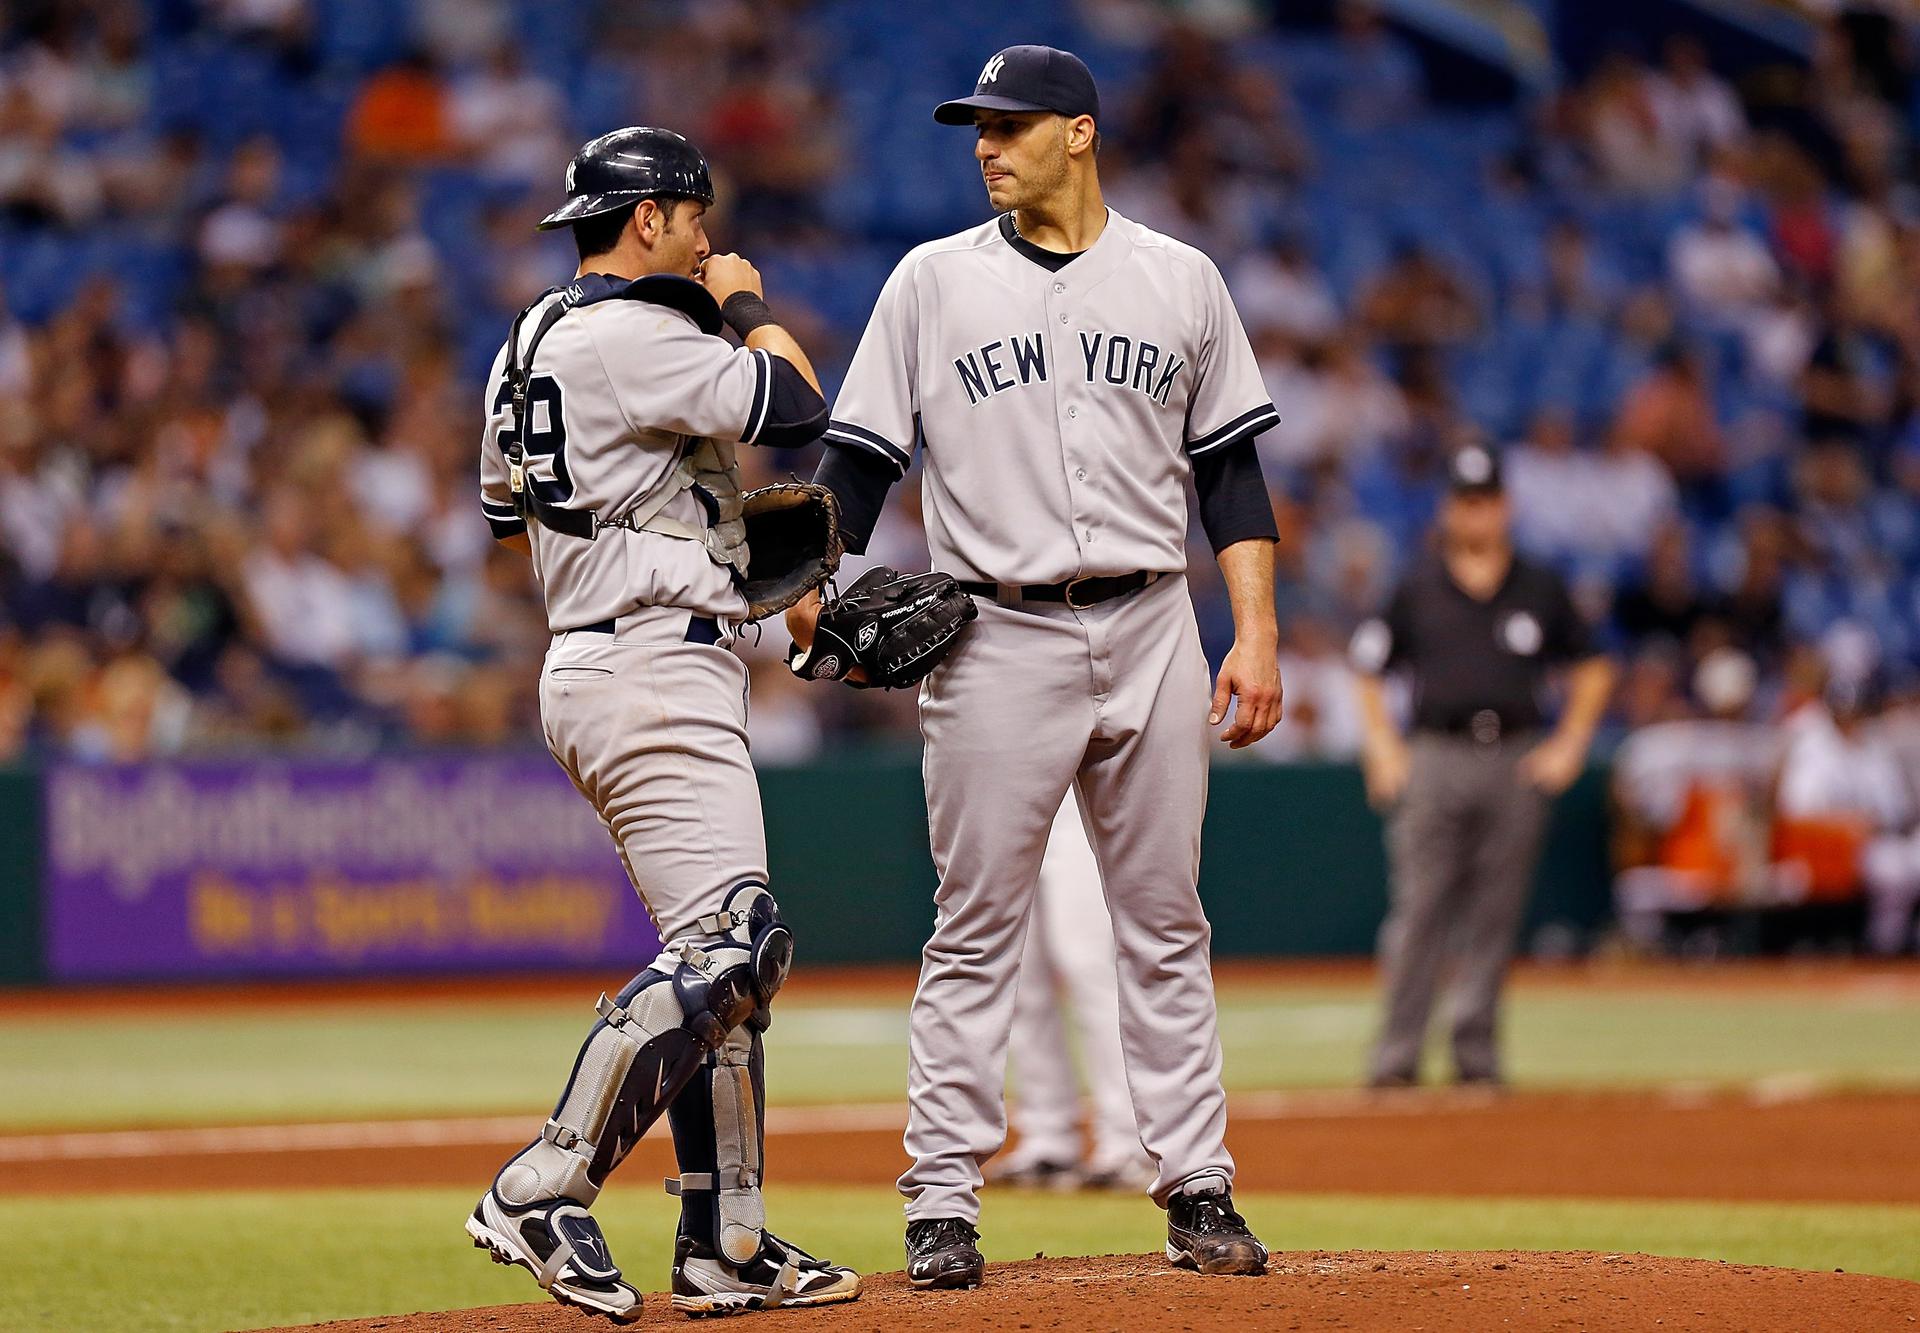 With Pettitte Pitching, Clemens Pays Yanks a Visit - The New York